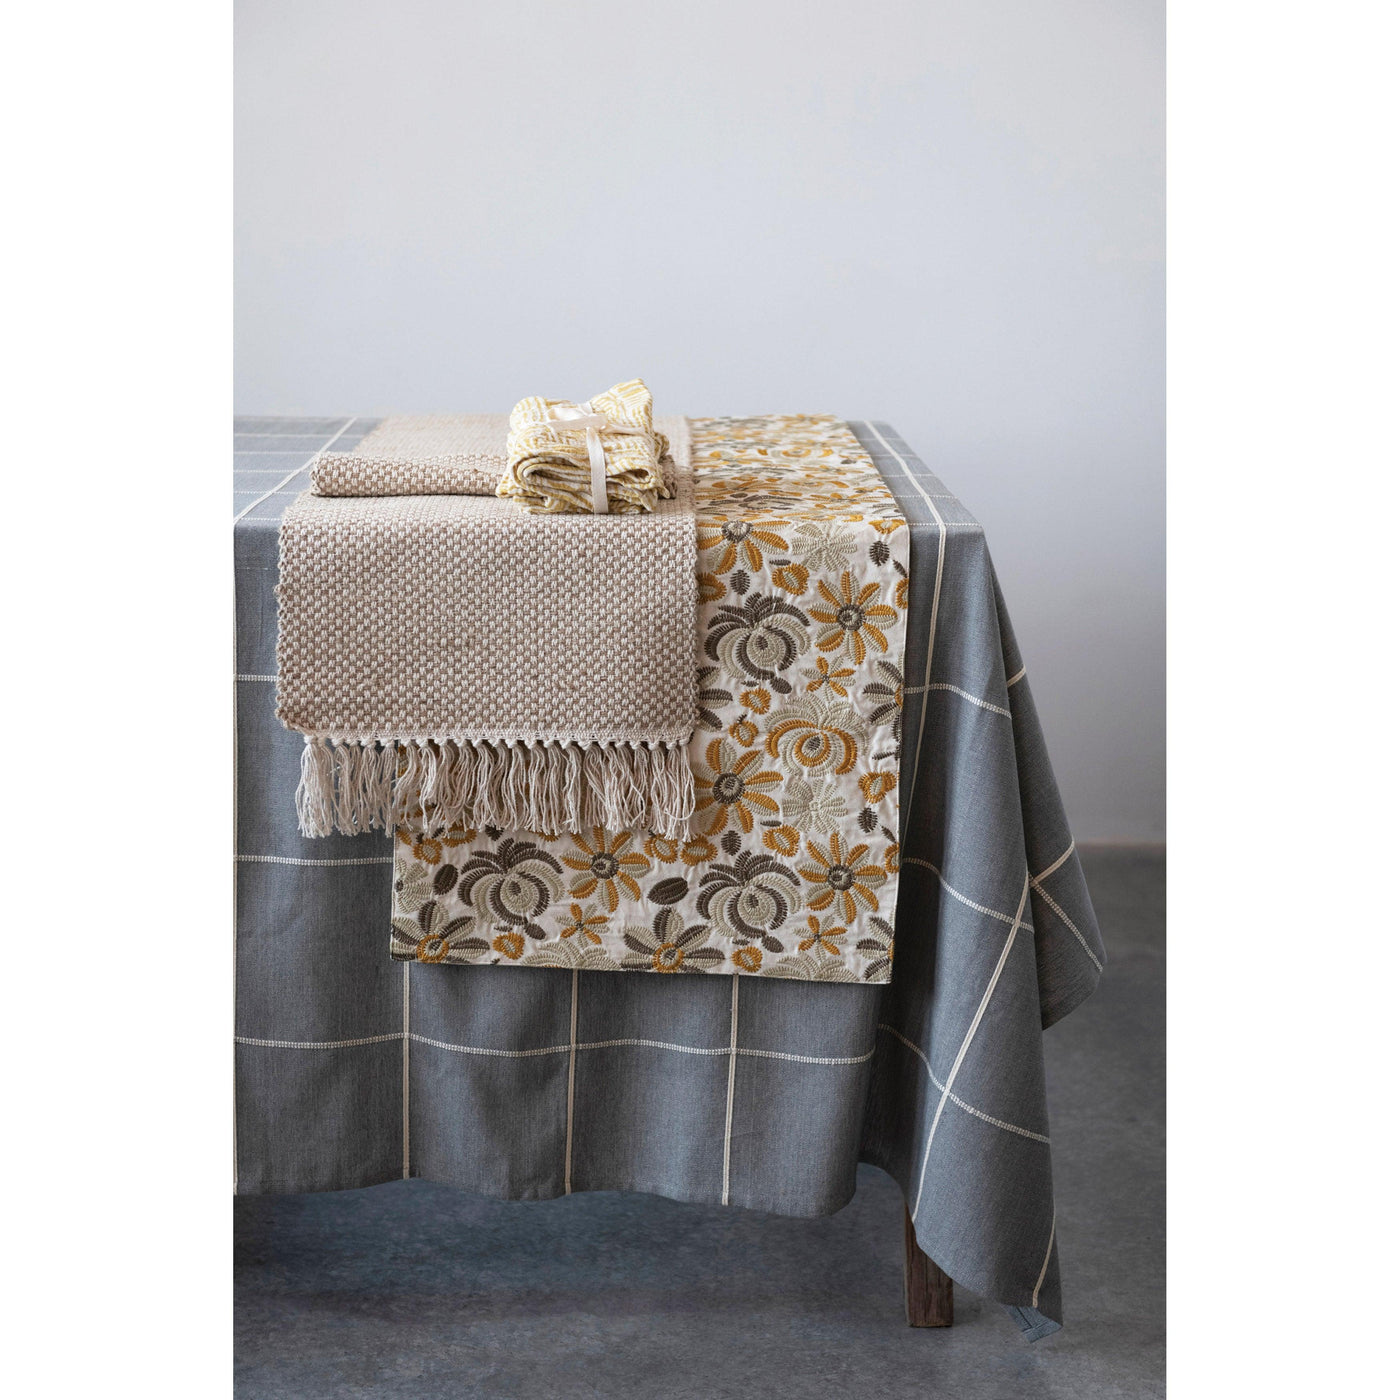 Woven Cotton Tablecloth with Grid Pattern - Birch and Bind